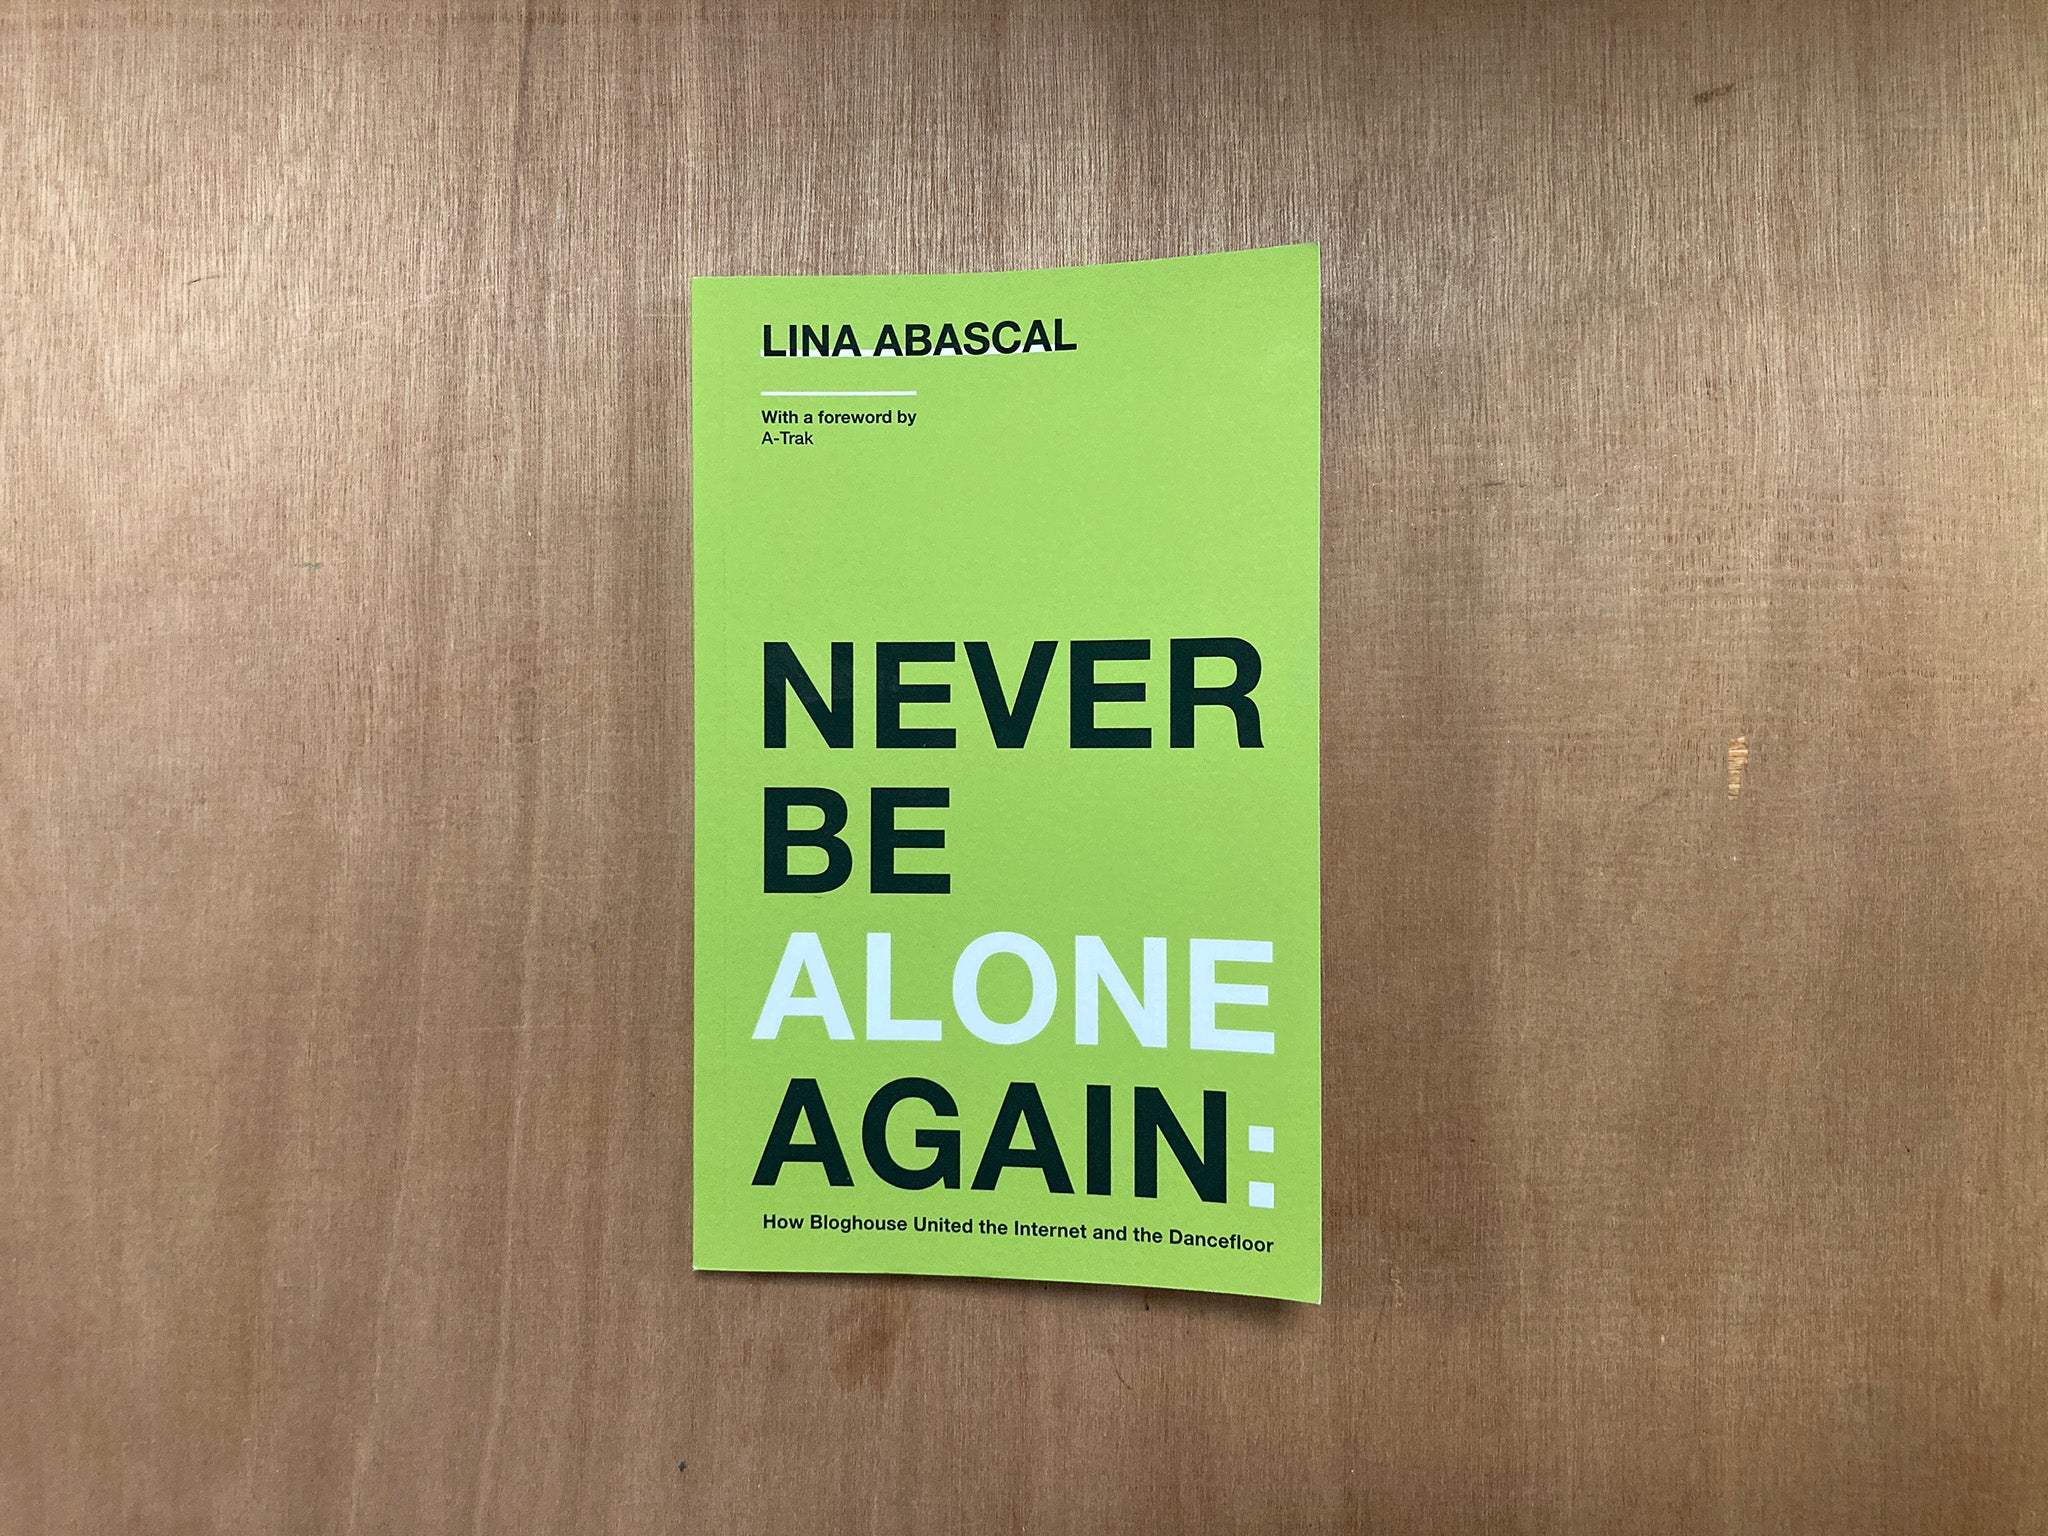 NEVER BE ALONE AGAIN: HOW BLOGHOUSE UNITED THE INTERNET AND THE DANCEFLOOR by Lina Abascal